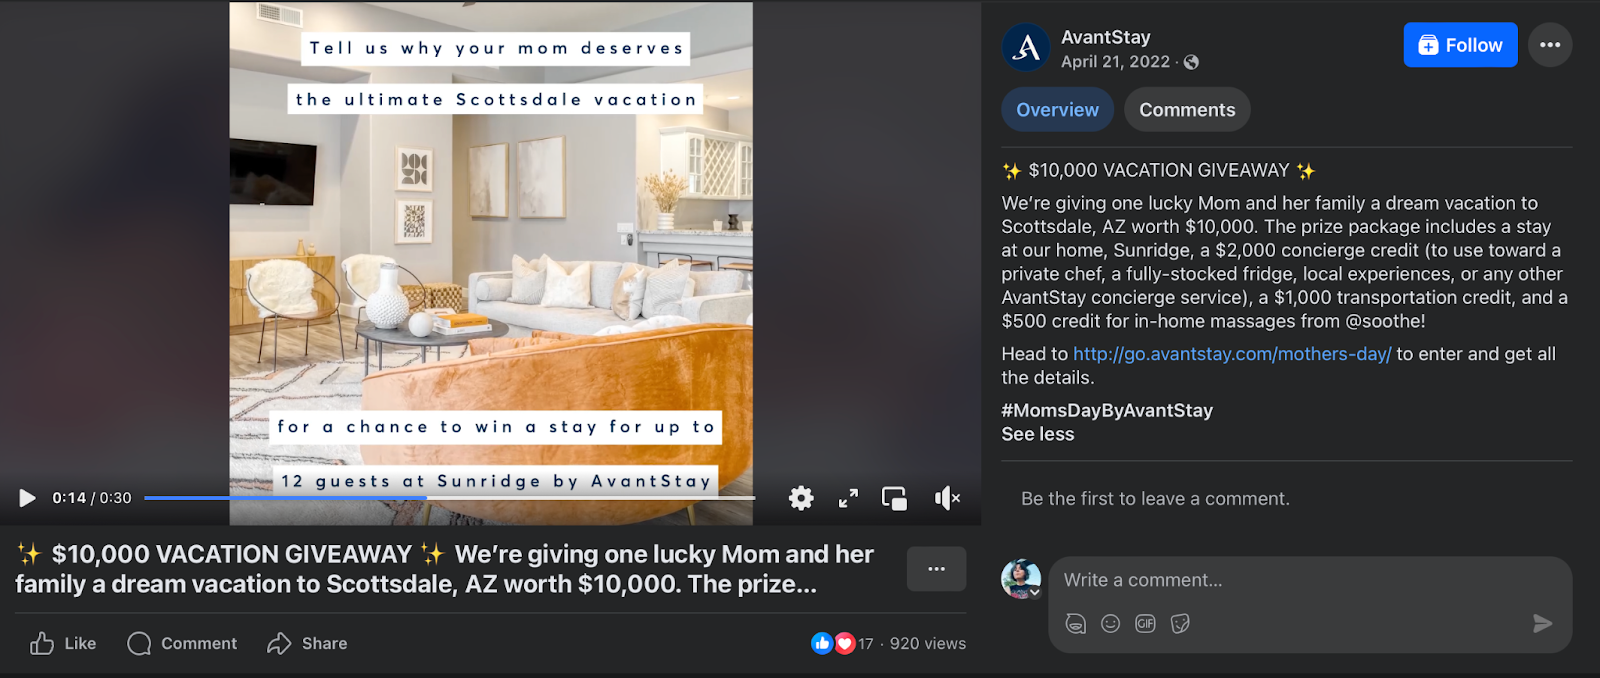 AvantStay_mothers_day_promotion_example